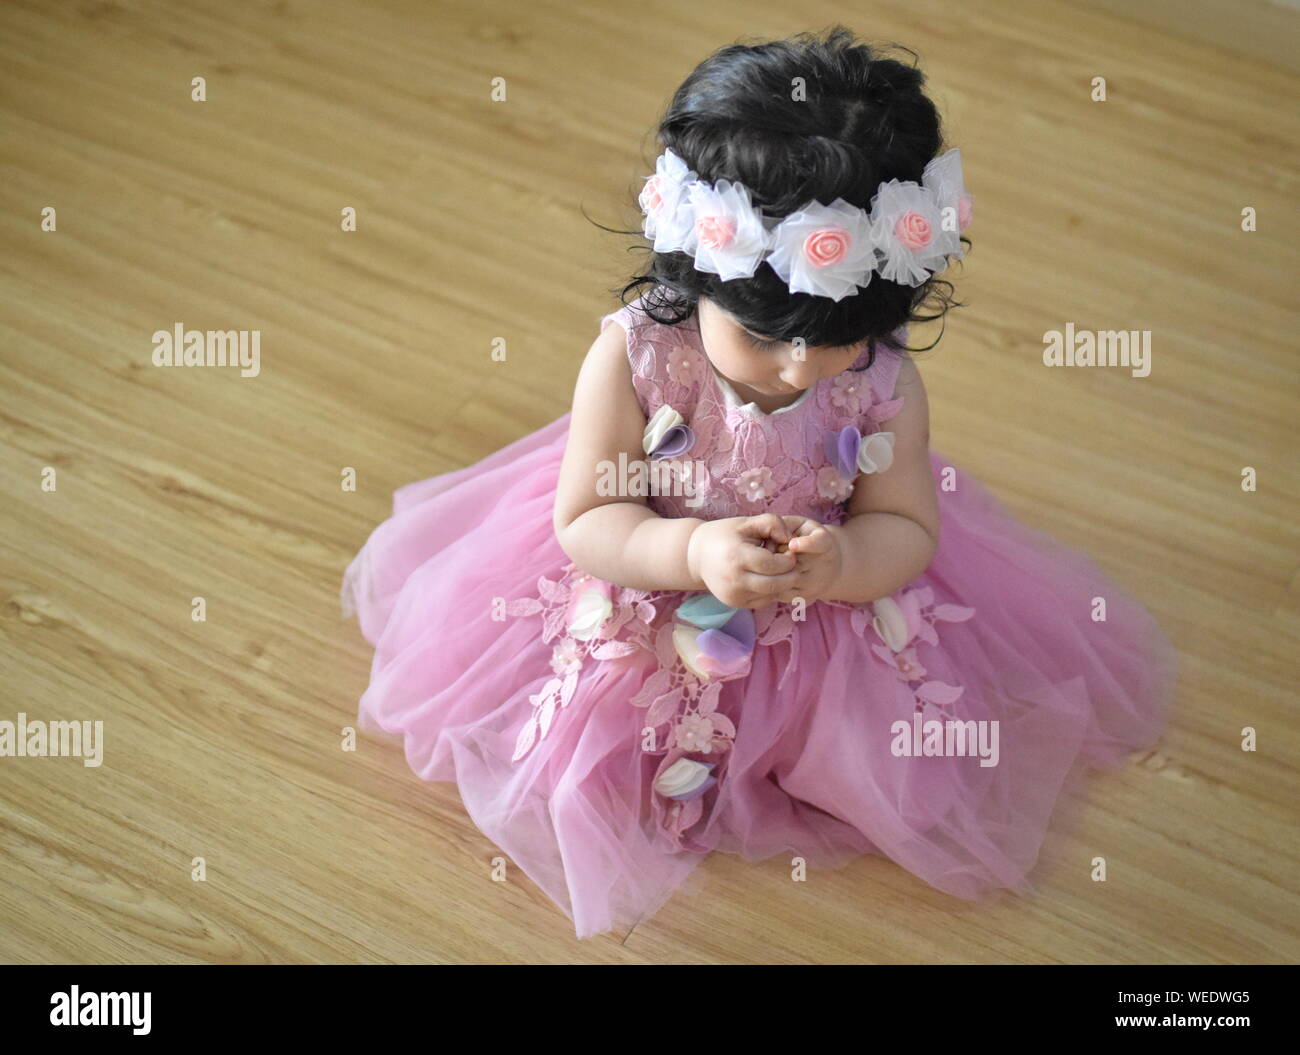 Top 999+ princess cute baby images – Amazing Collection princess cute baby images Full 4K